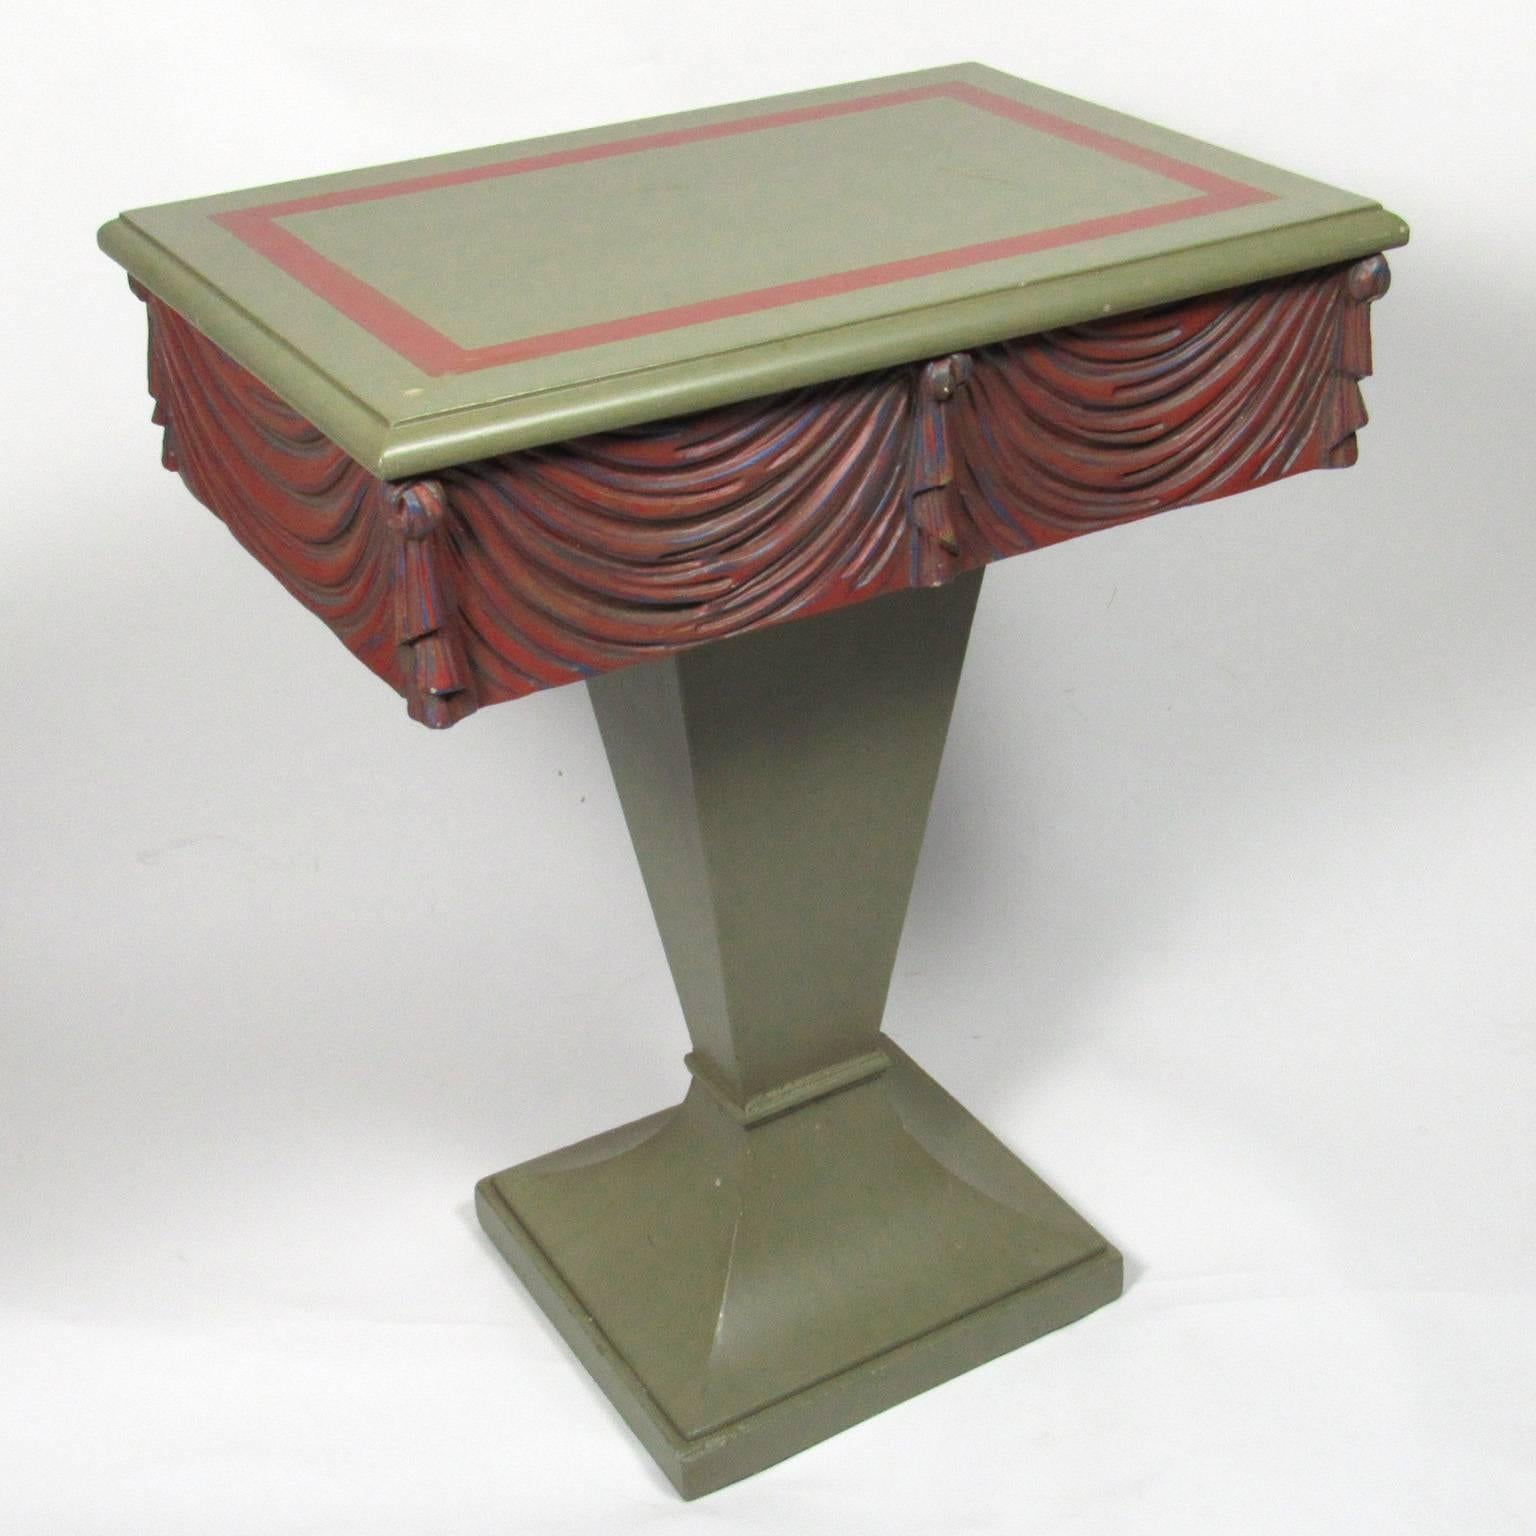 Fun pair of mid-20th century neoclassical style paint-decorated swag-carved side tables, green paint with red painted single drawers raised on a graduated pedestal base. Measures: Height 27 in., width 21 in., depth 14 1/2 in.